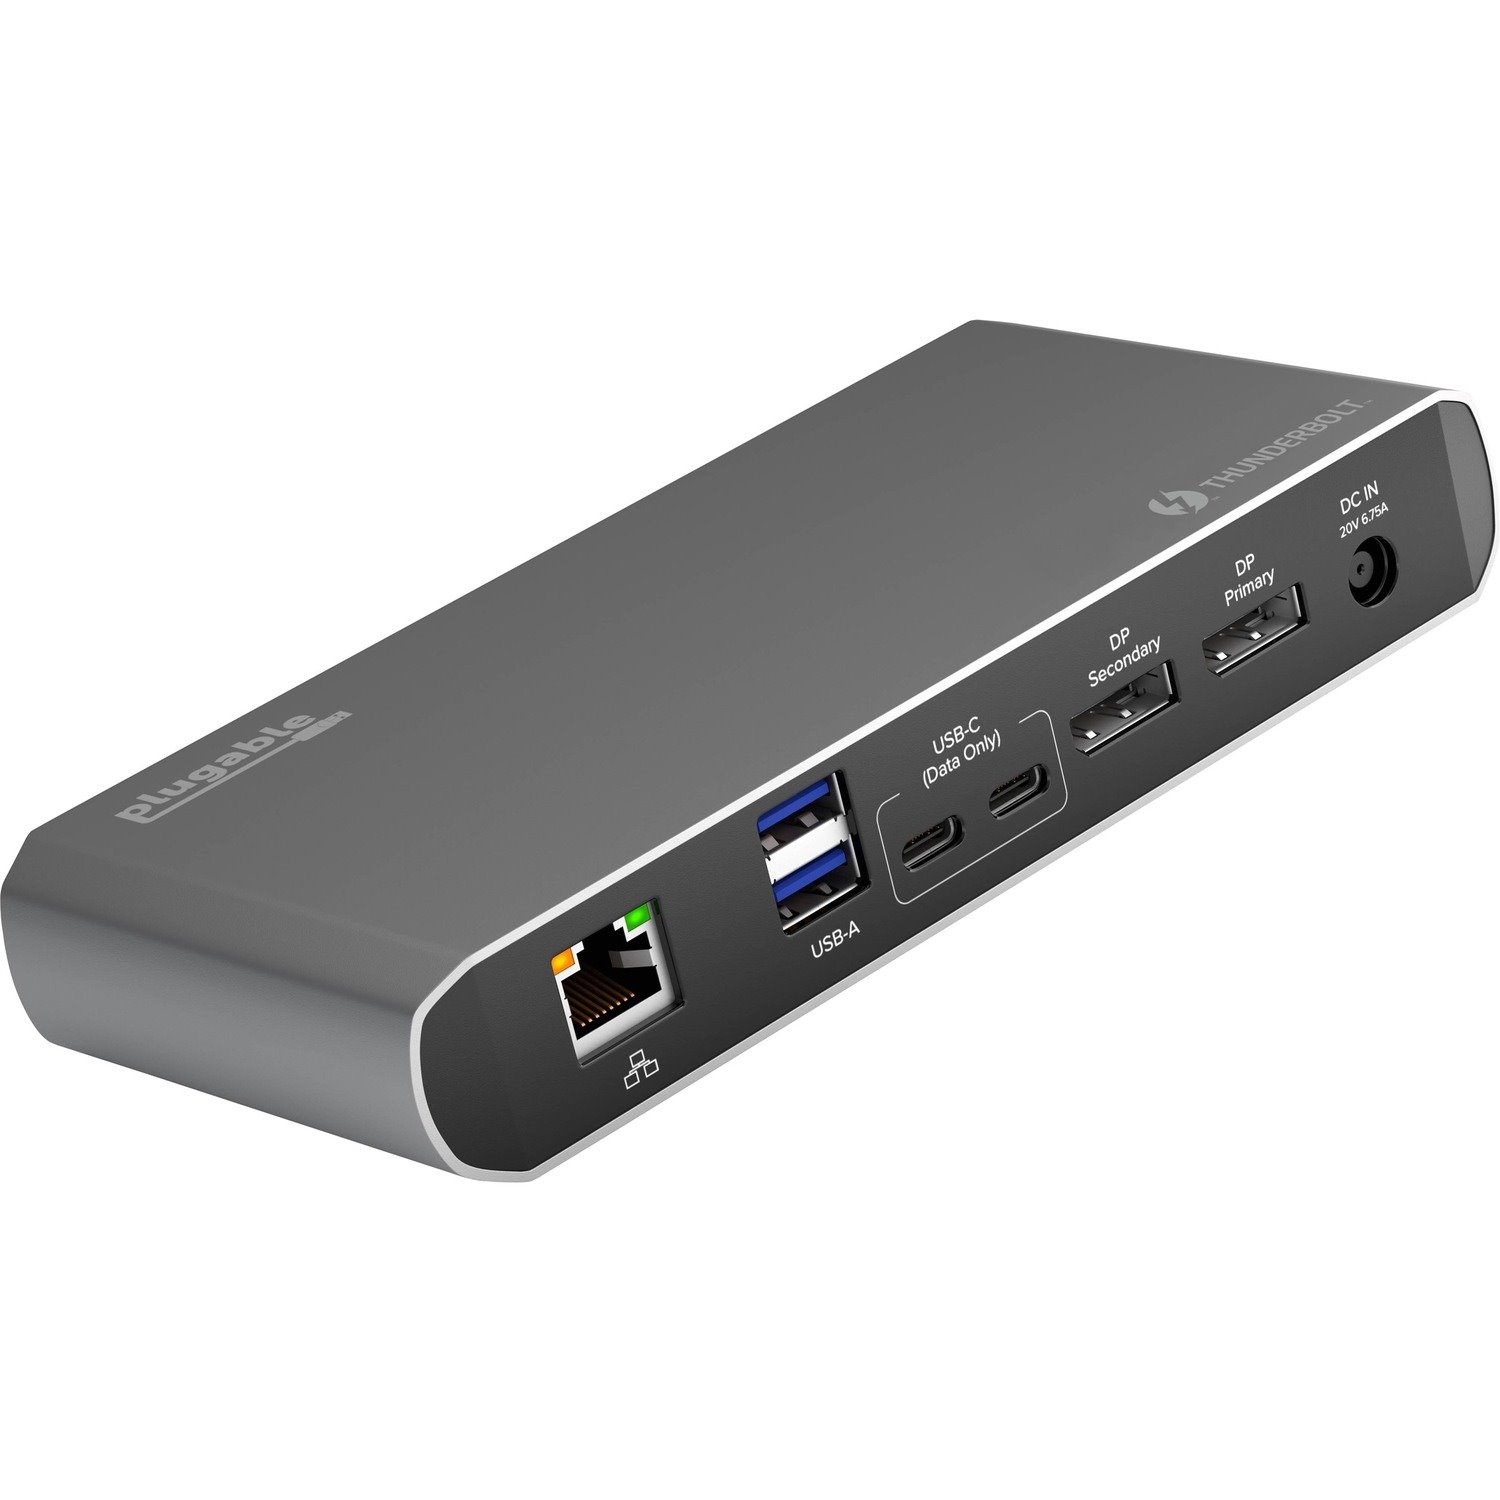 Plugable Thunderbolt 3 and USB C Dock with 60W Charging, Compatible with MacBook / MacBook Pro and Windows